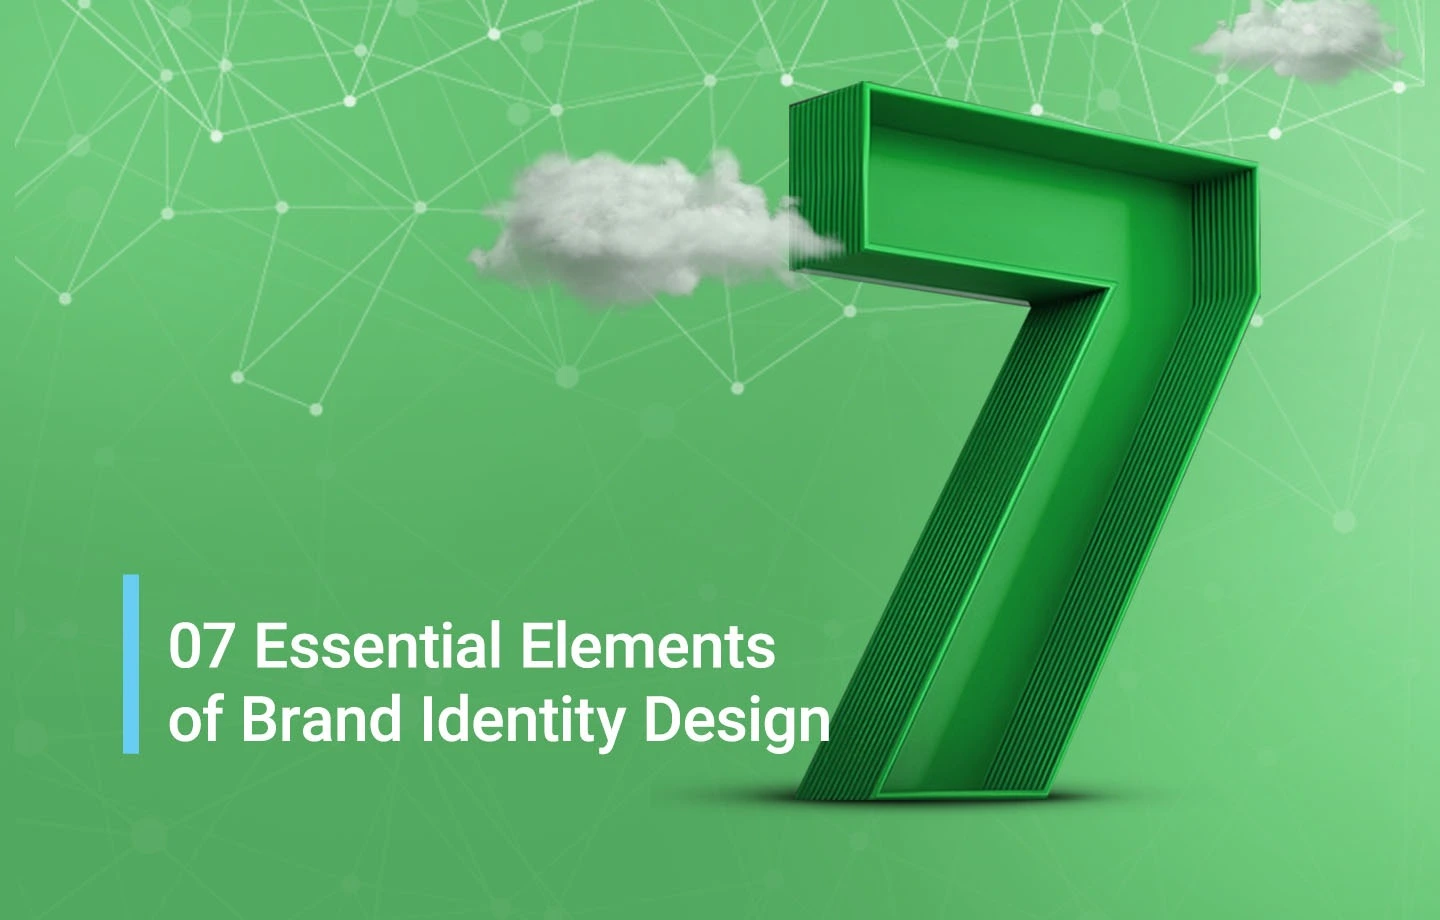 Main Elements of a Brand Identity Design